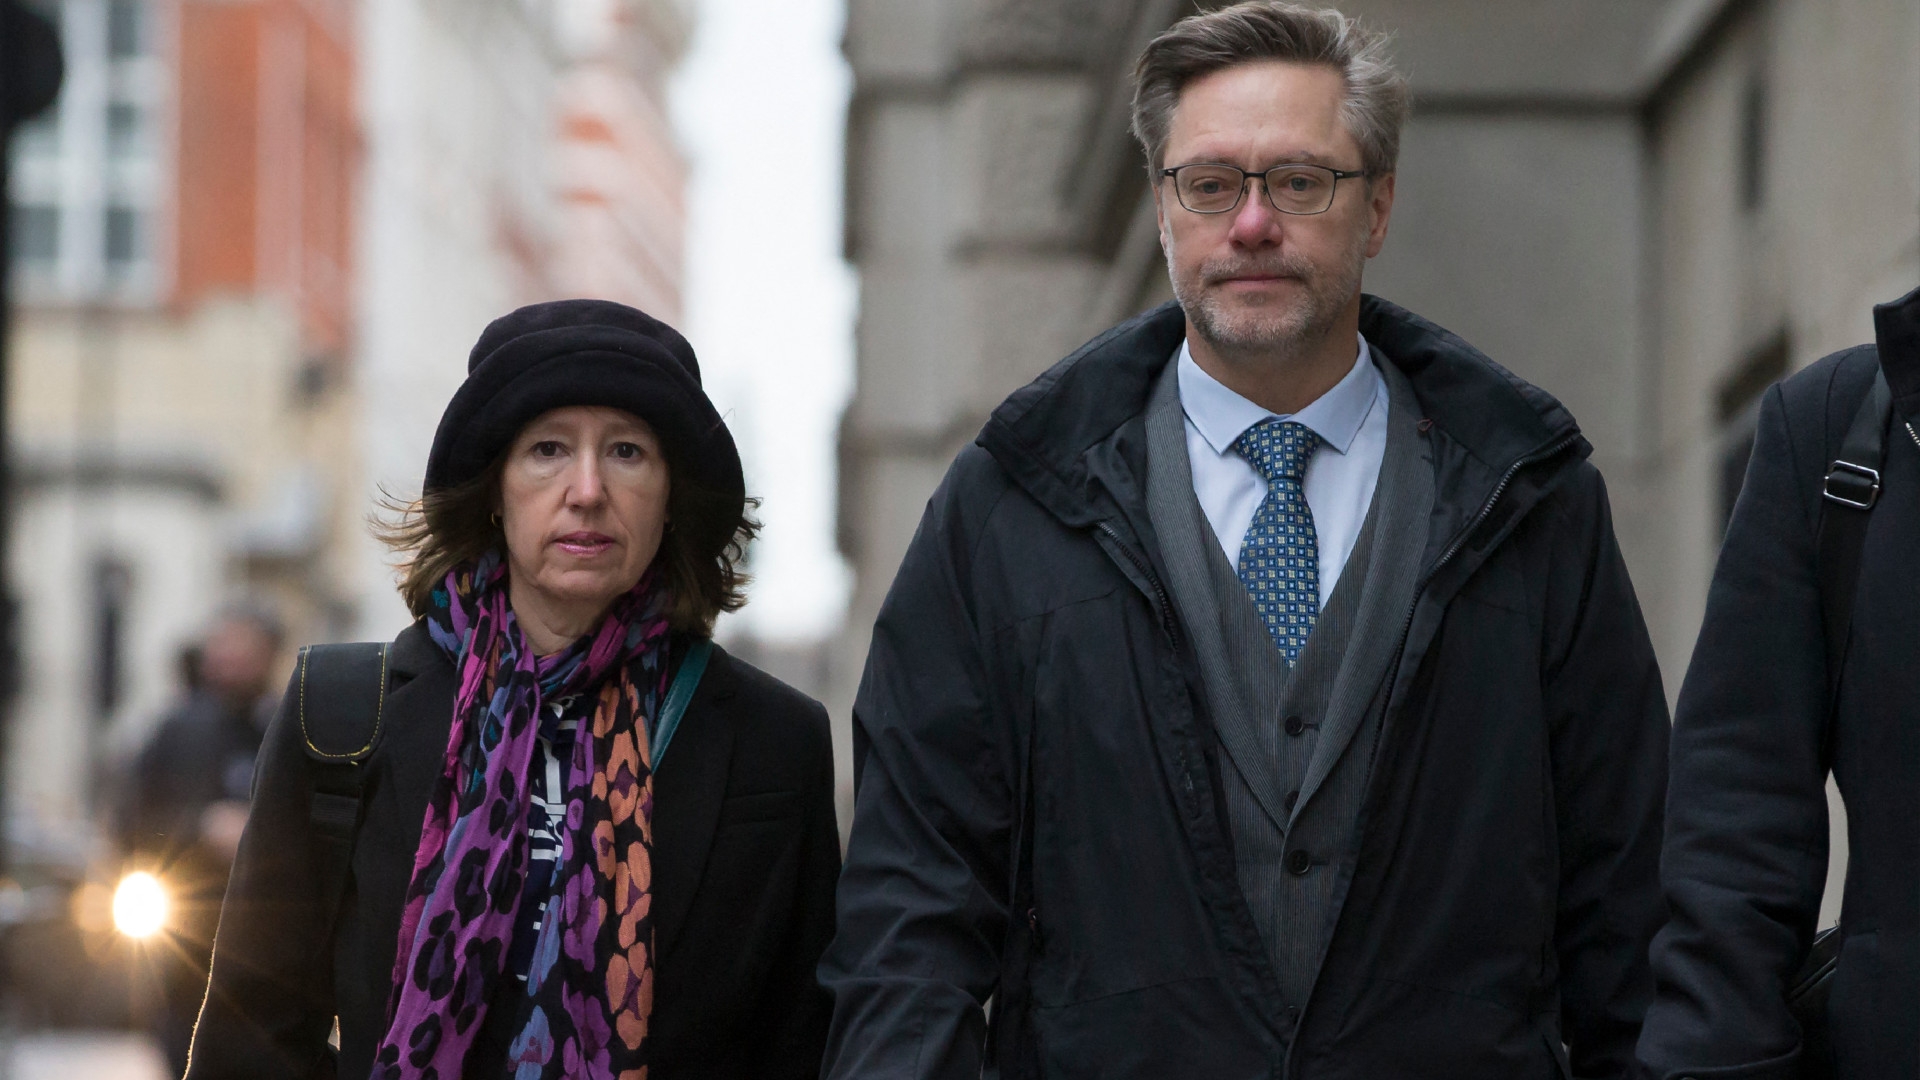 Sally Lane (L) and John Letts (R), parents of Jack Letts who was accused of joining the Islamic State, arrive at the Old Bailey court in central London facing a trial on charges of funding terrorism, on 12 January 2017 (AFP)